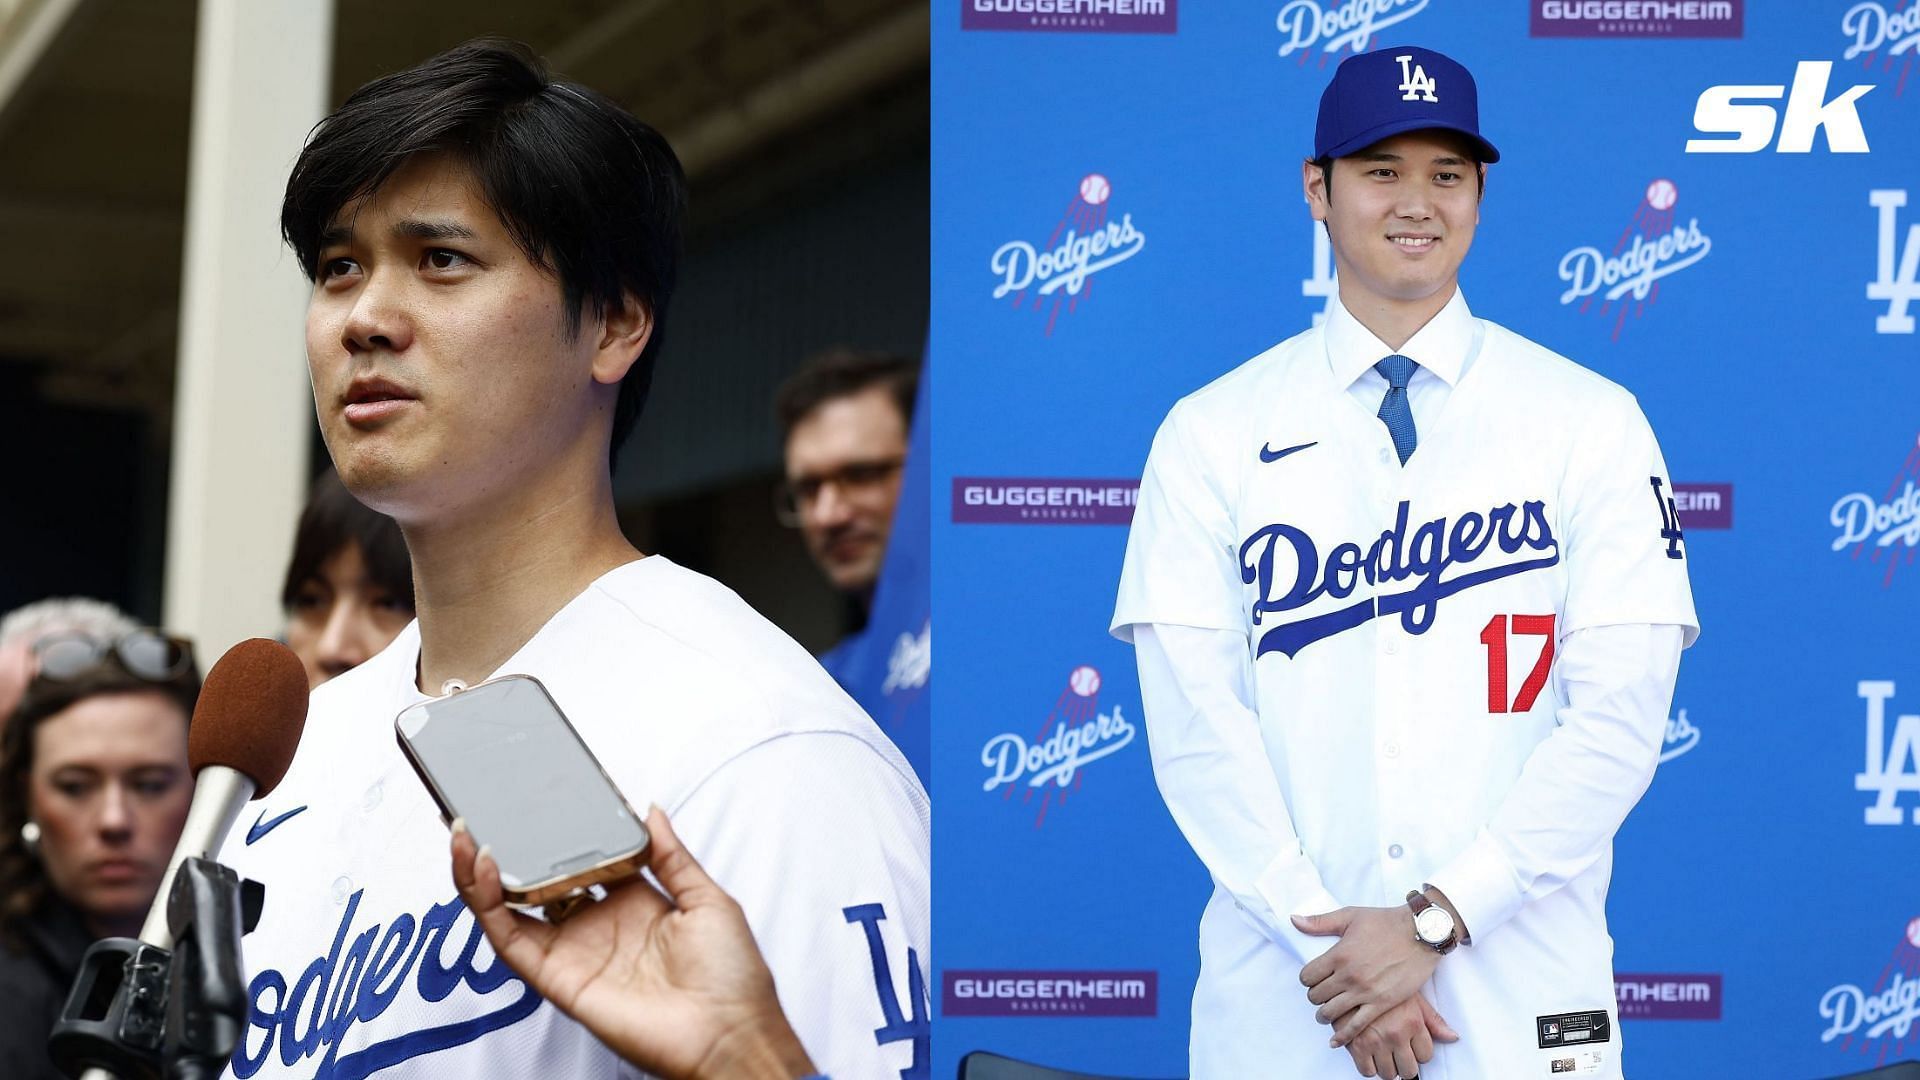 Shohei Ohtani appears ready to serve as Dodgers DH on Opening Day following explosive first batting practice